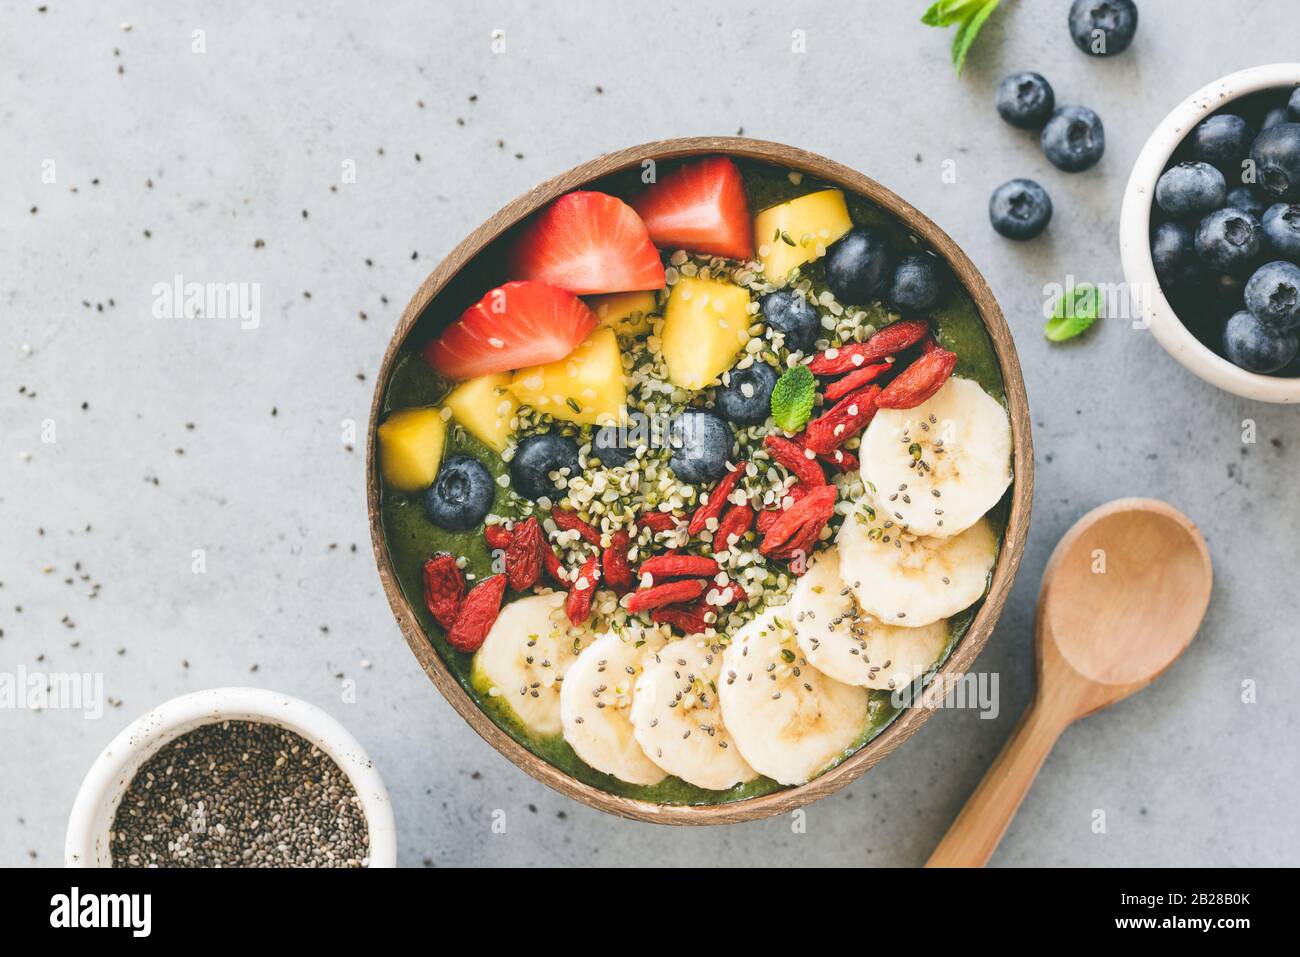 https://c8.alamy.com/comp/2B28B0K/raw-superfood-smoothie-in-coconut-bowl-with-superfood-toppings-hemp-seed-chia-seed-mango-blueberry-banana-goji-berries-and-strawberry-2B28B0K.jpg